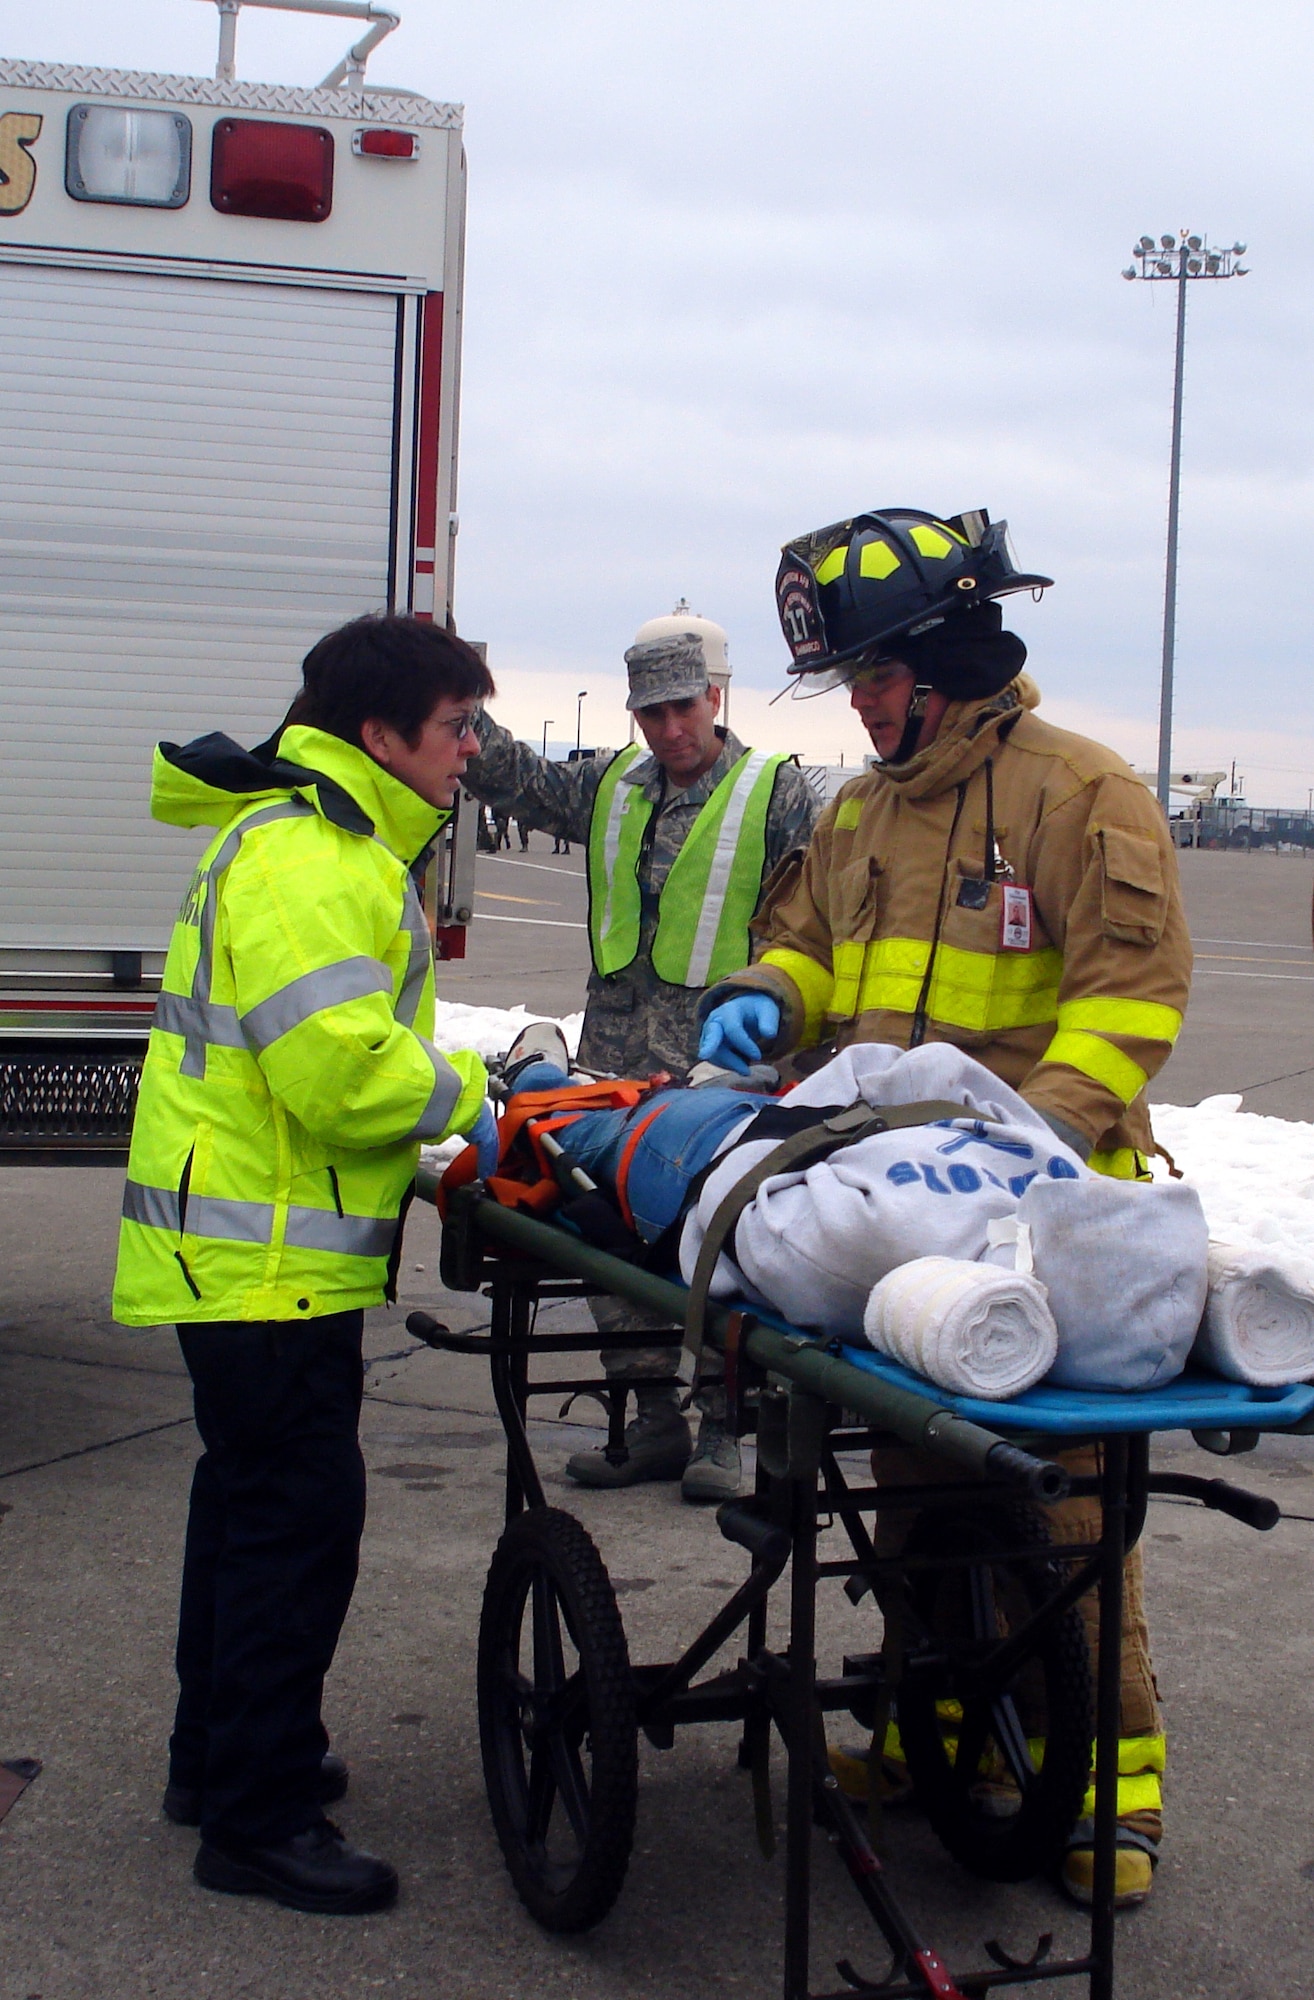 A member of the Malmstrom Fire Department reports his assessment of the victim's injuries to an emergency services medical technician during an exercise scenario at Malmstrom in April. An exercise evaluation team member observes. (U.S. Air Force courtesy photo)